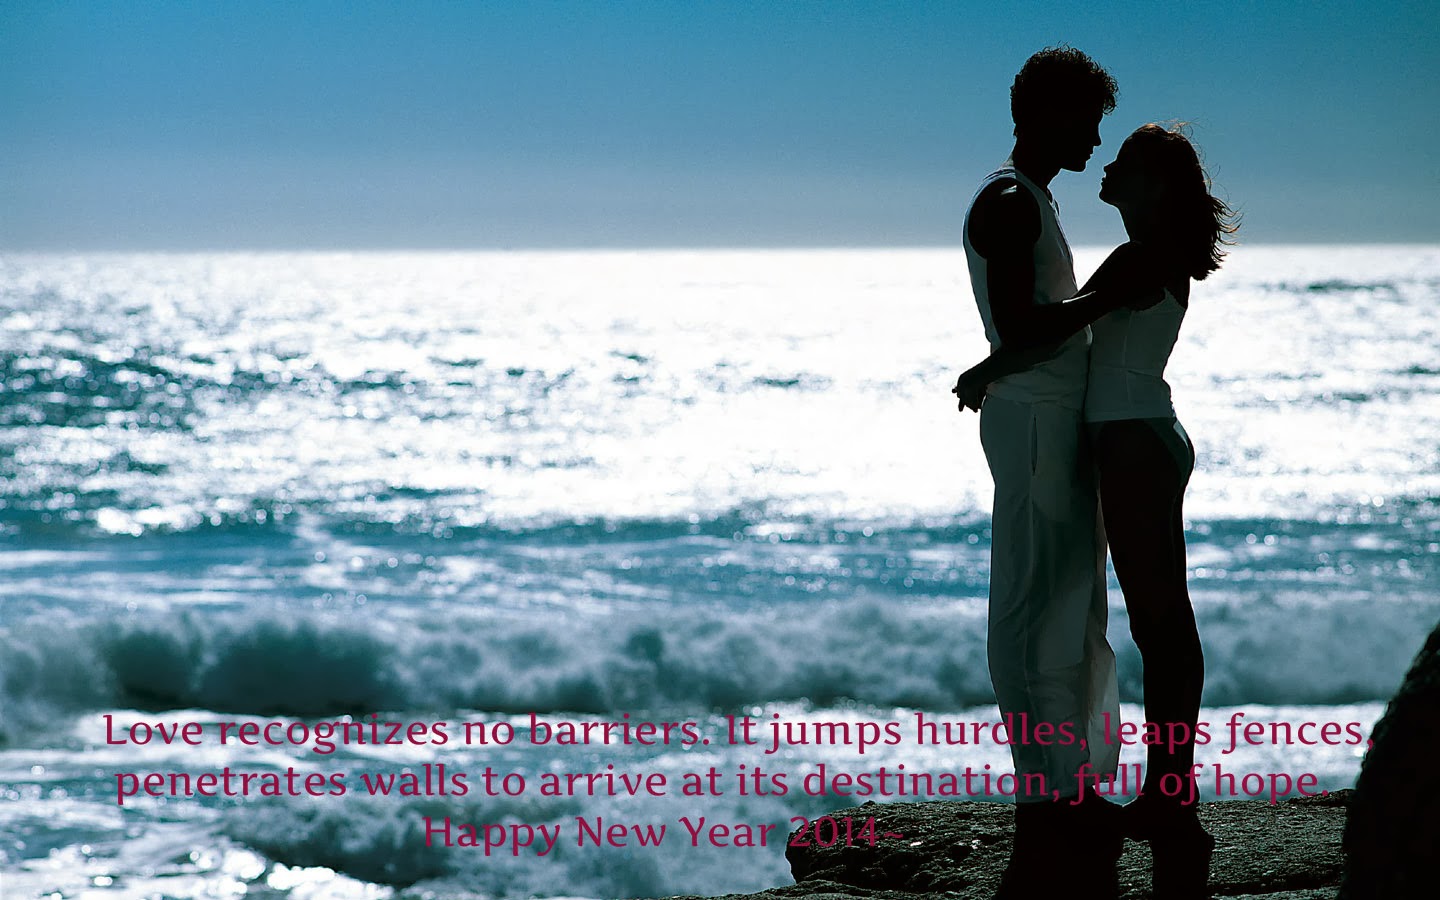 New Year Love Quotes 2014 for Lovers | Five Best New Year 2014 Love ...